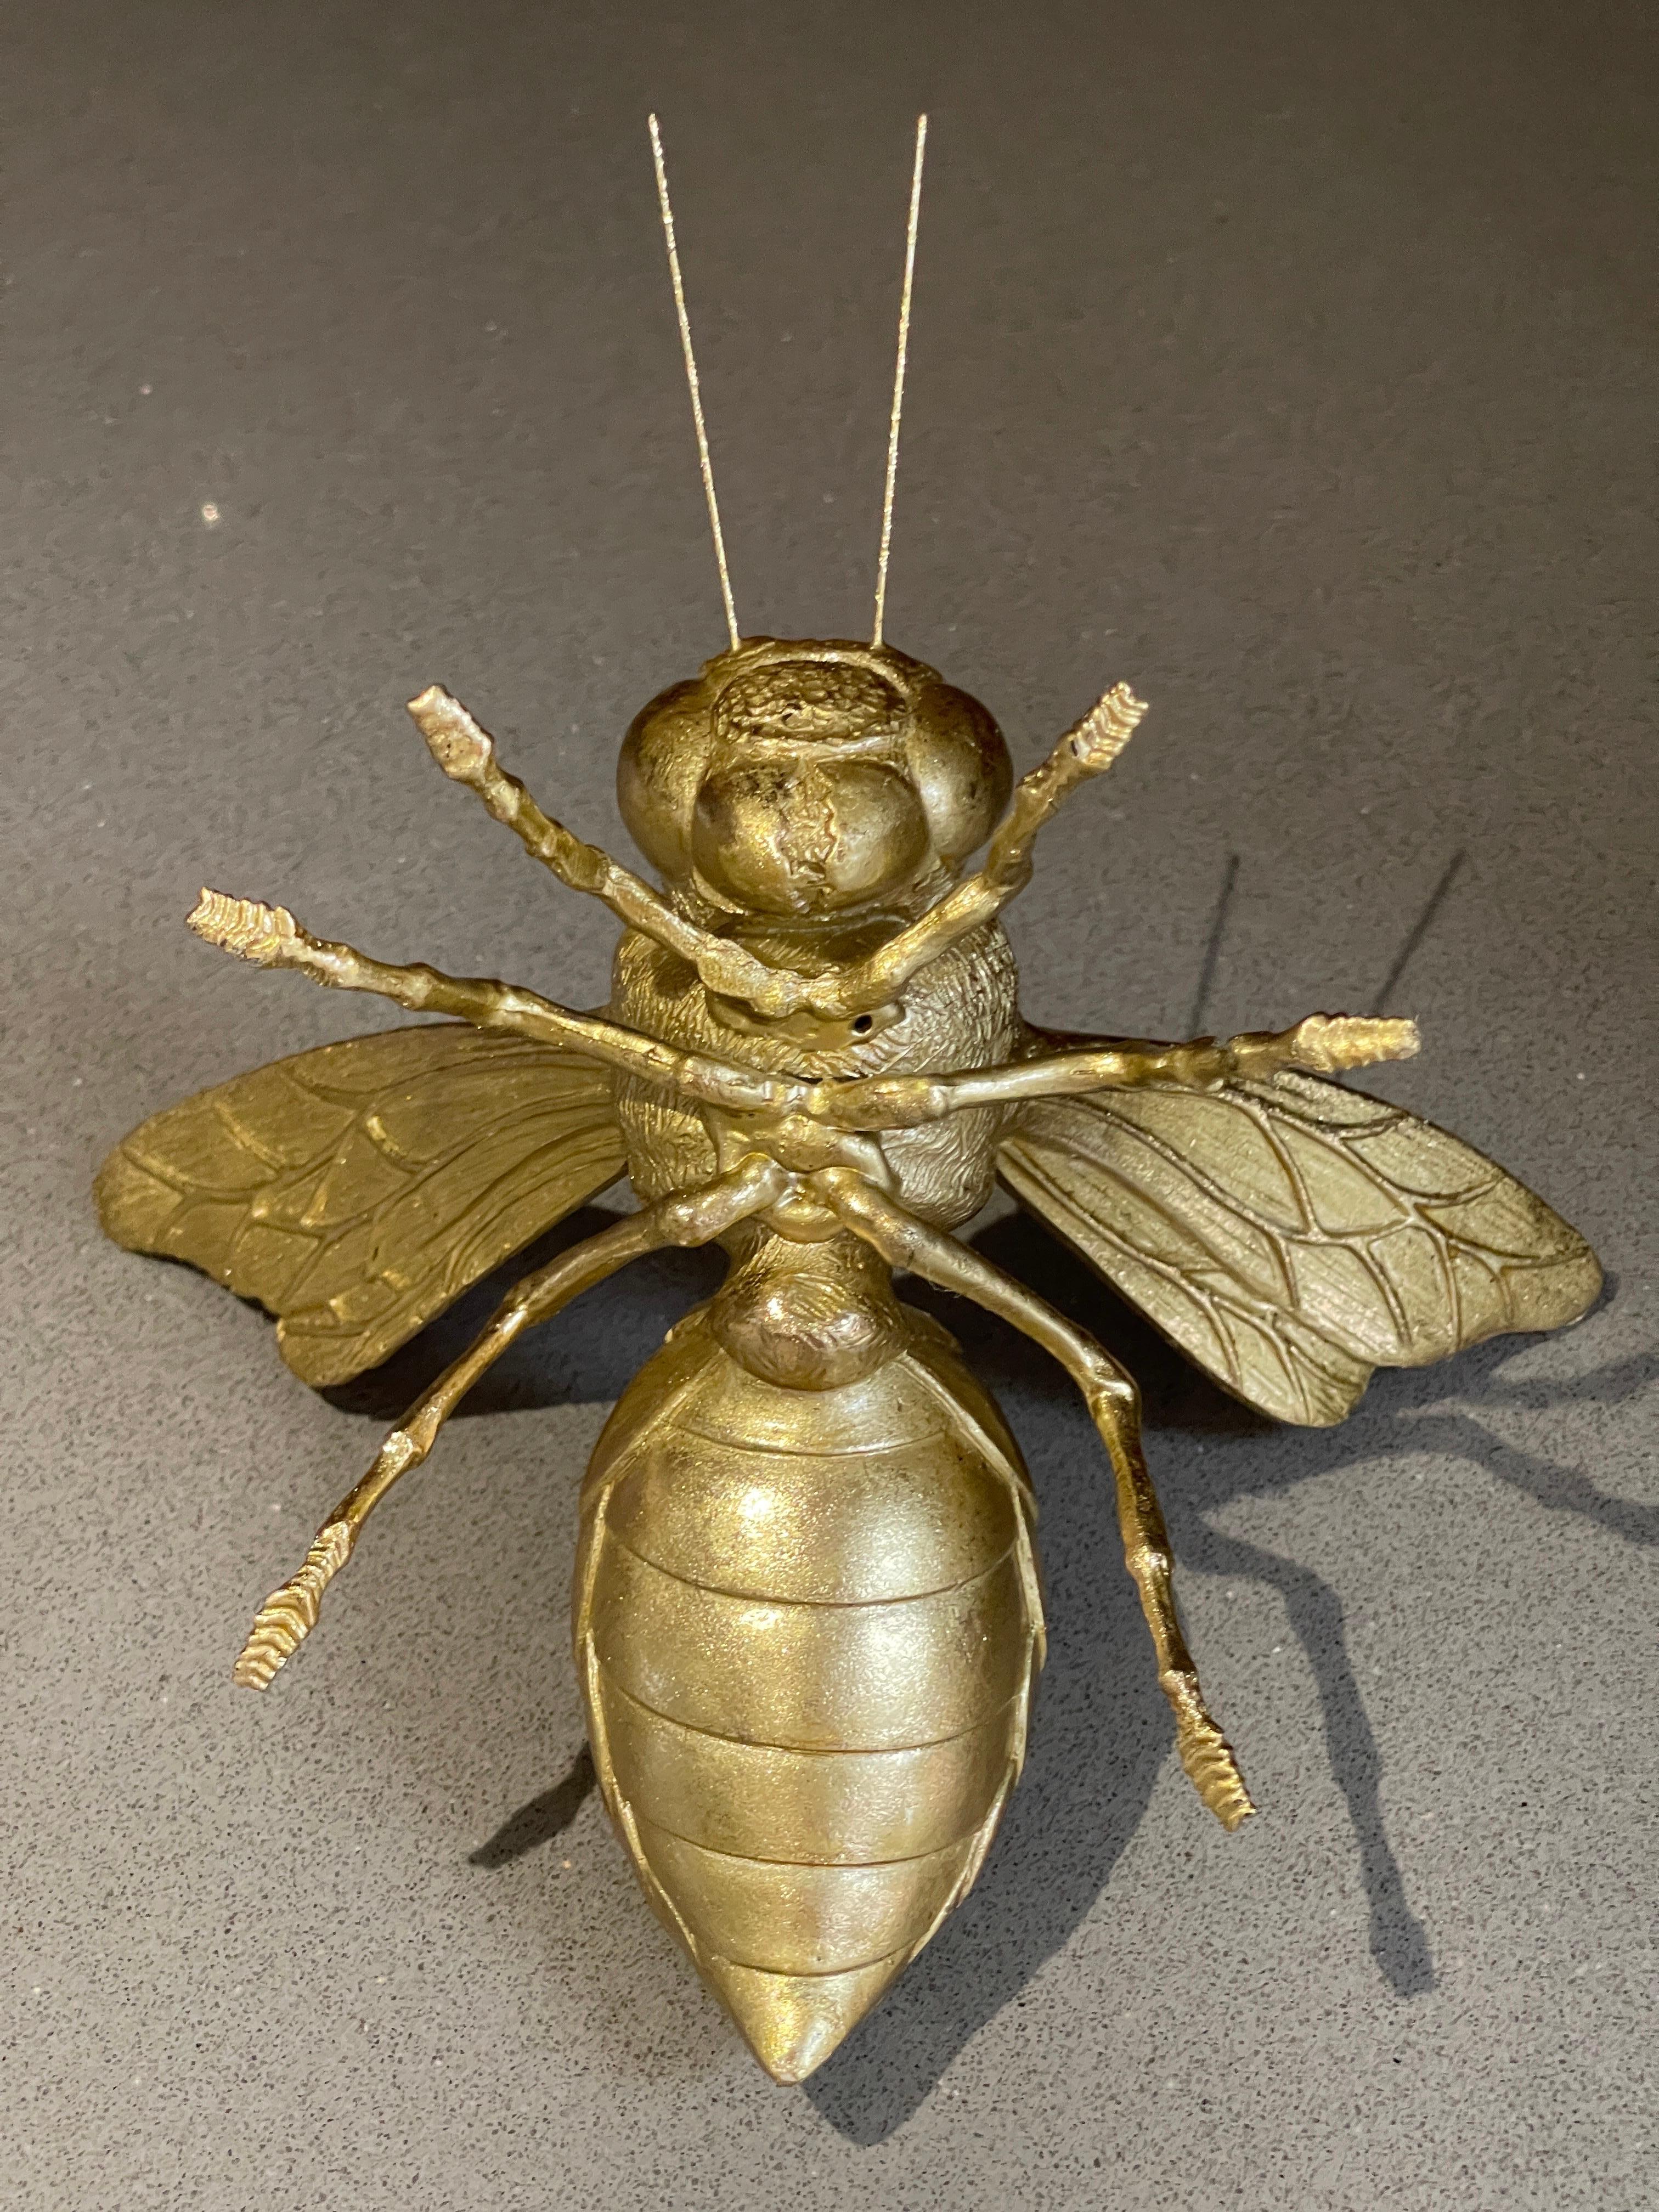 Late 20th Century Vintage Decorative Gold Bee Ornament Bumble Bee Sculpture LUXURY ORNAMENT GOLD  For Sale